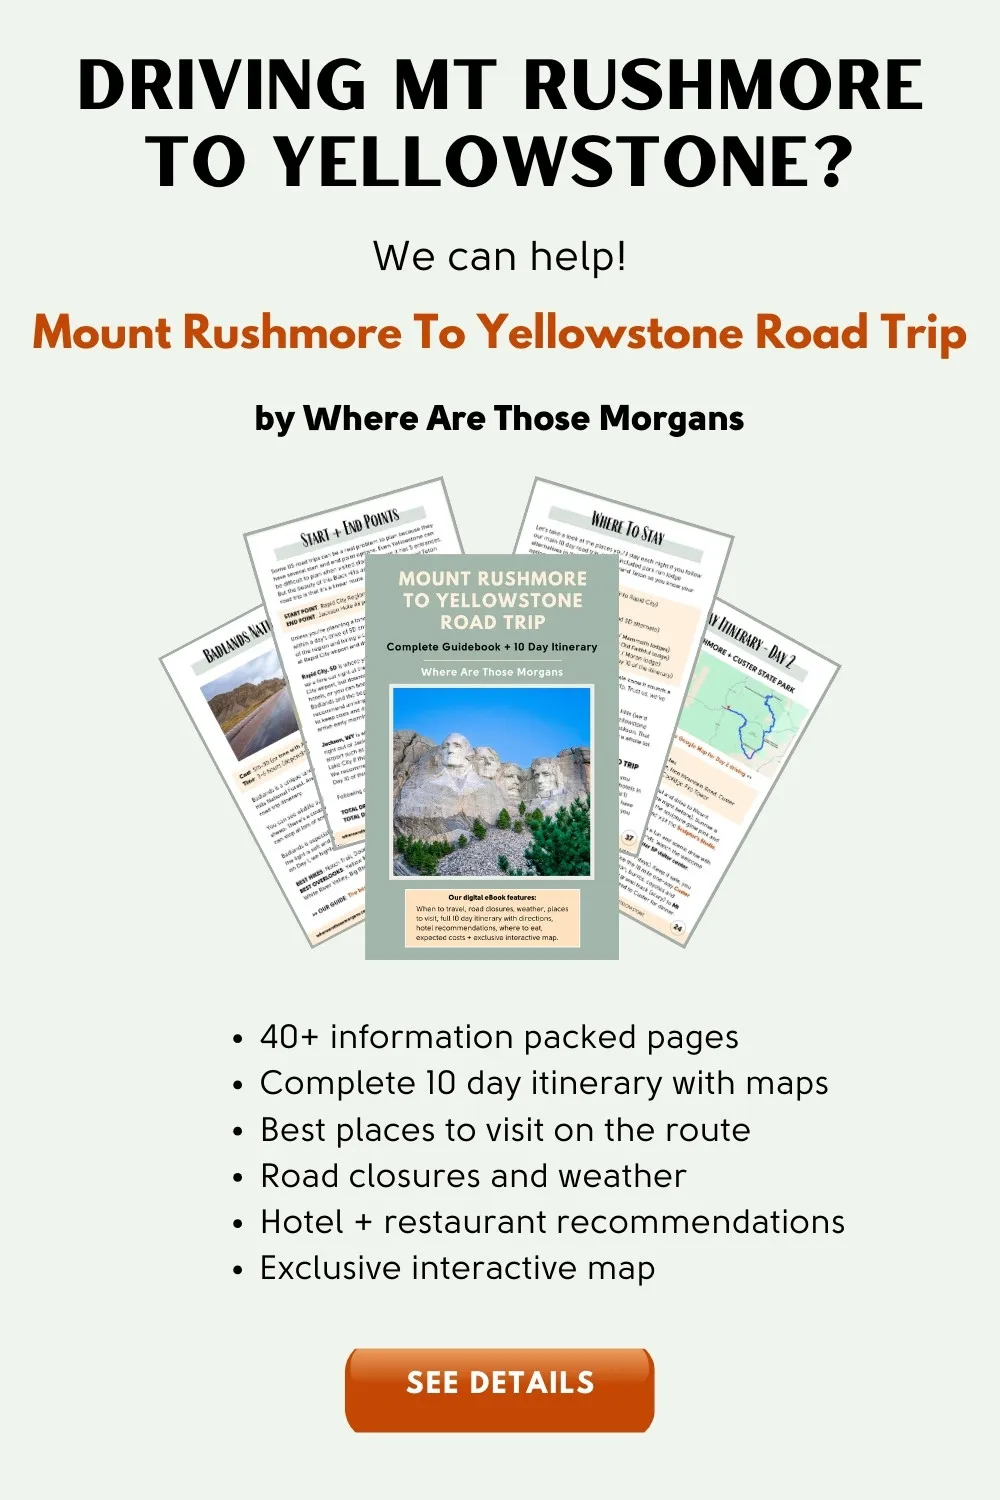 Mount Rushmore to Yellowstone Road Trip Guidebook by Where Are Those Morgans